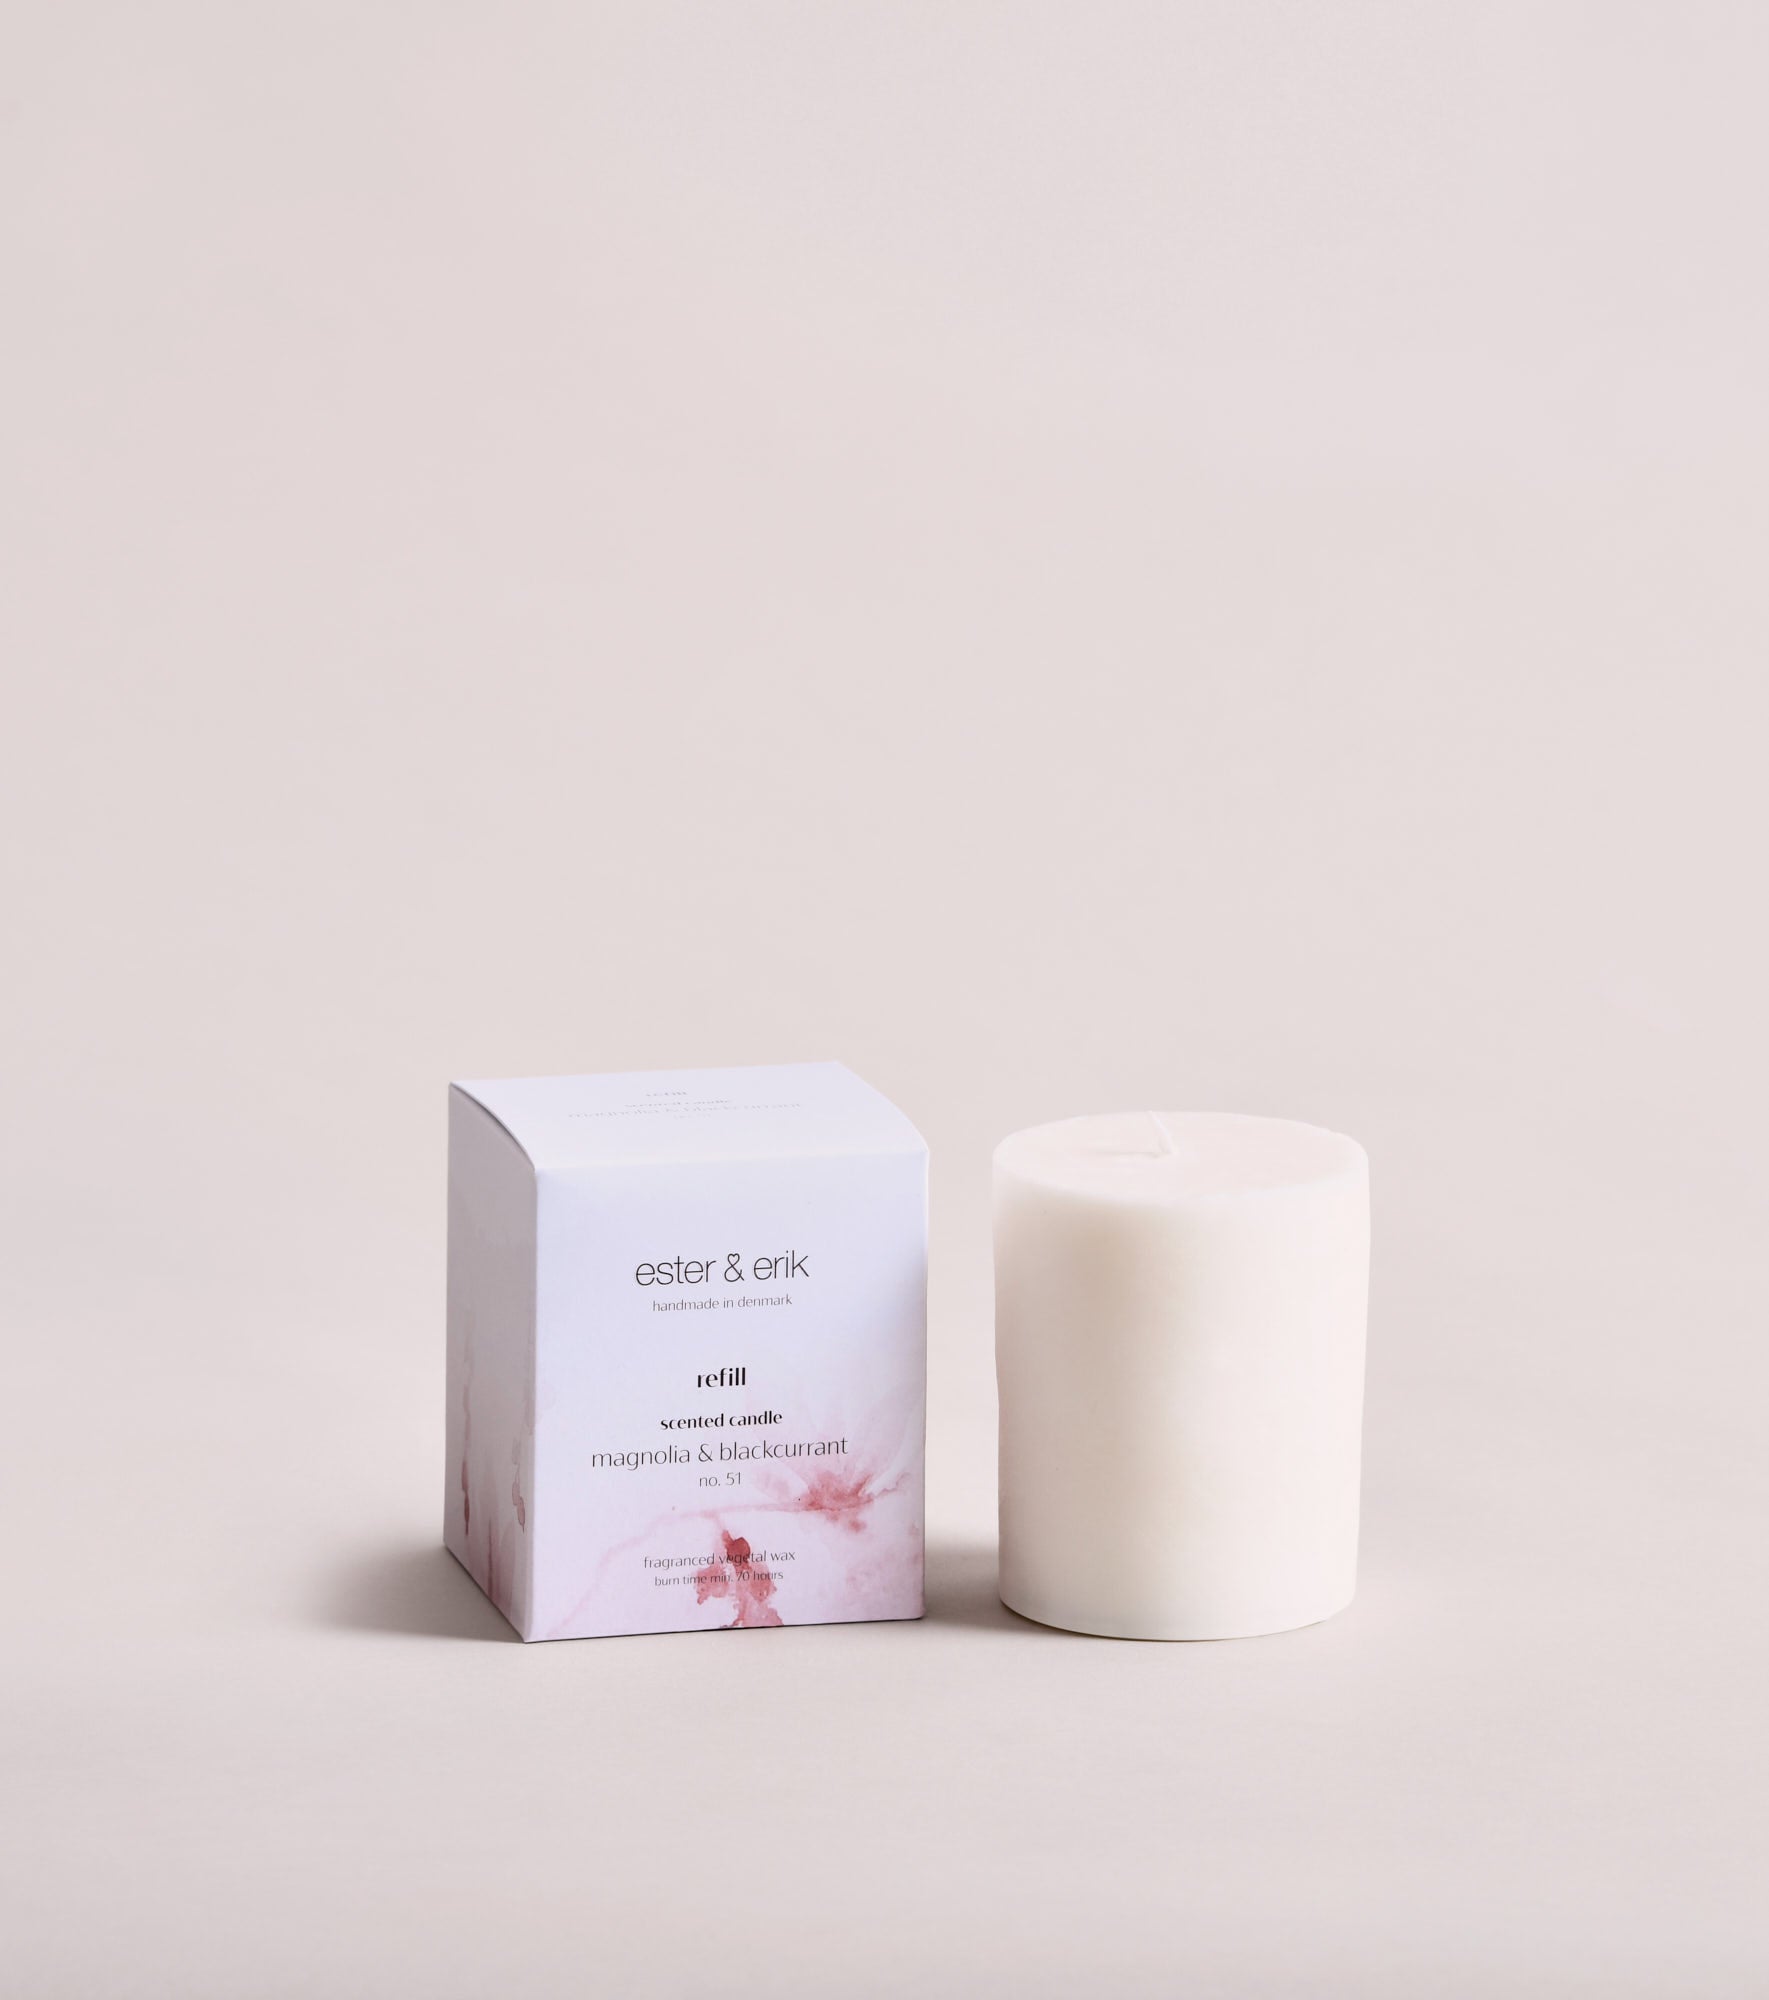 No. 51 Magnolia & blackcurrant Scented candle *Refill